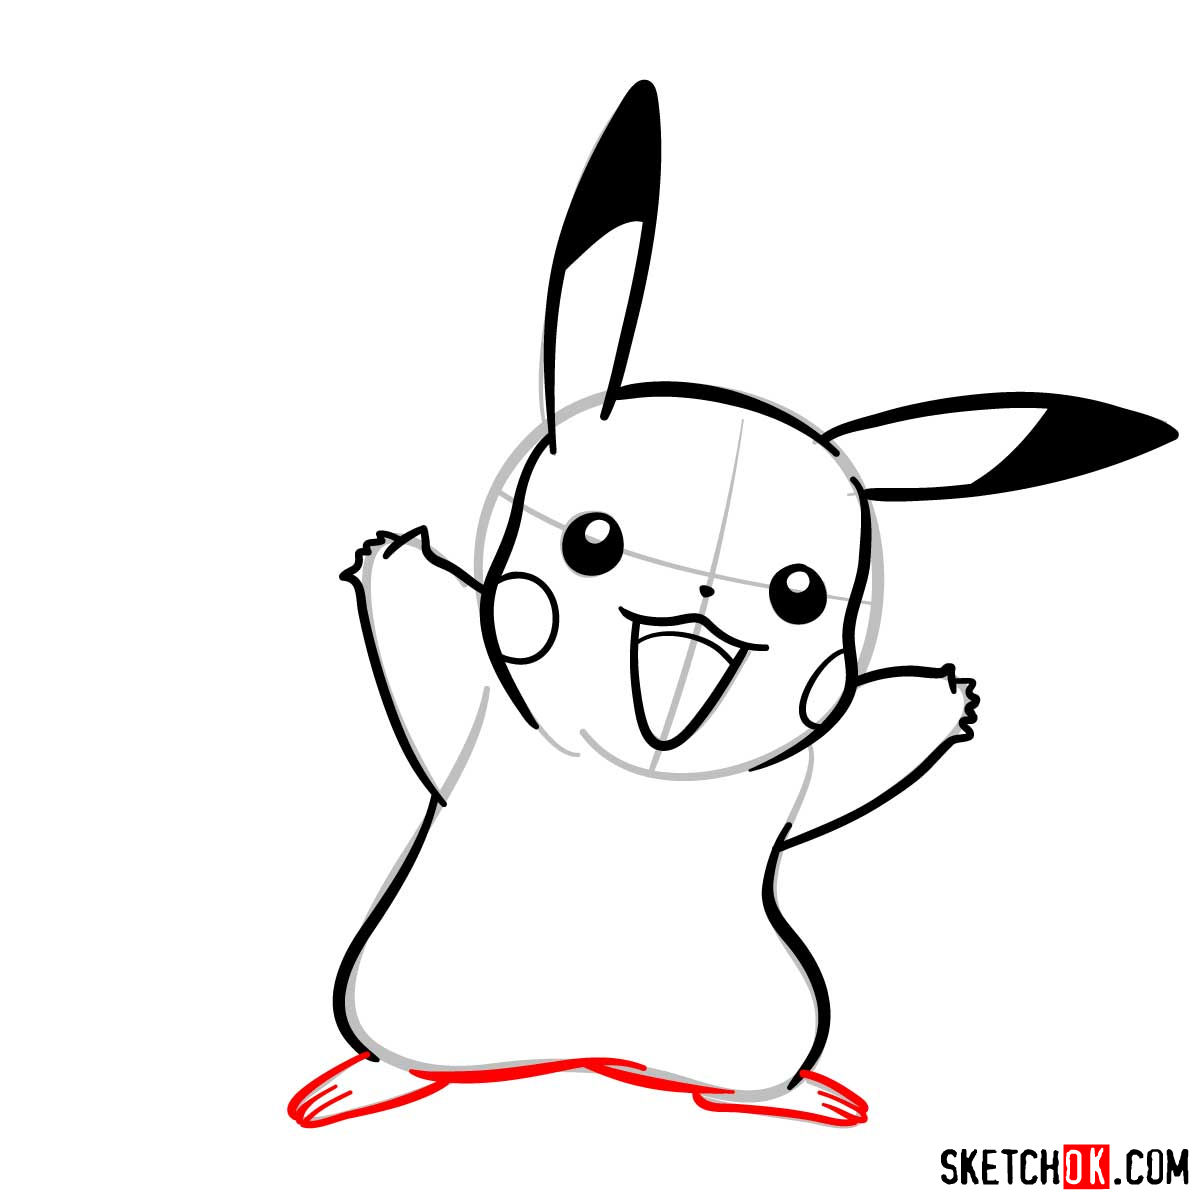 How to draw Pikachu Pokemon with arms wide open - step 08